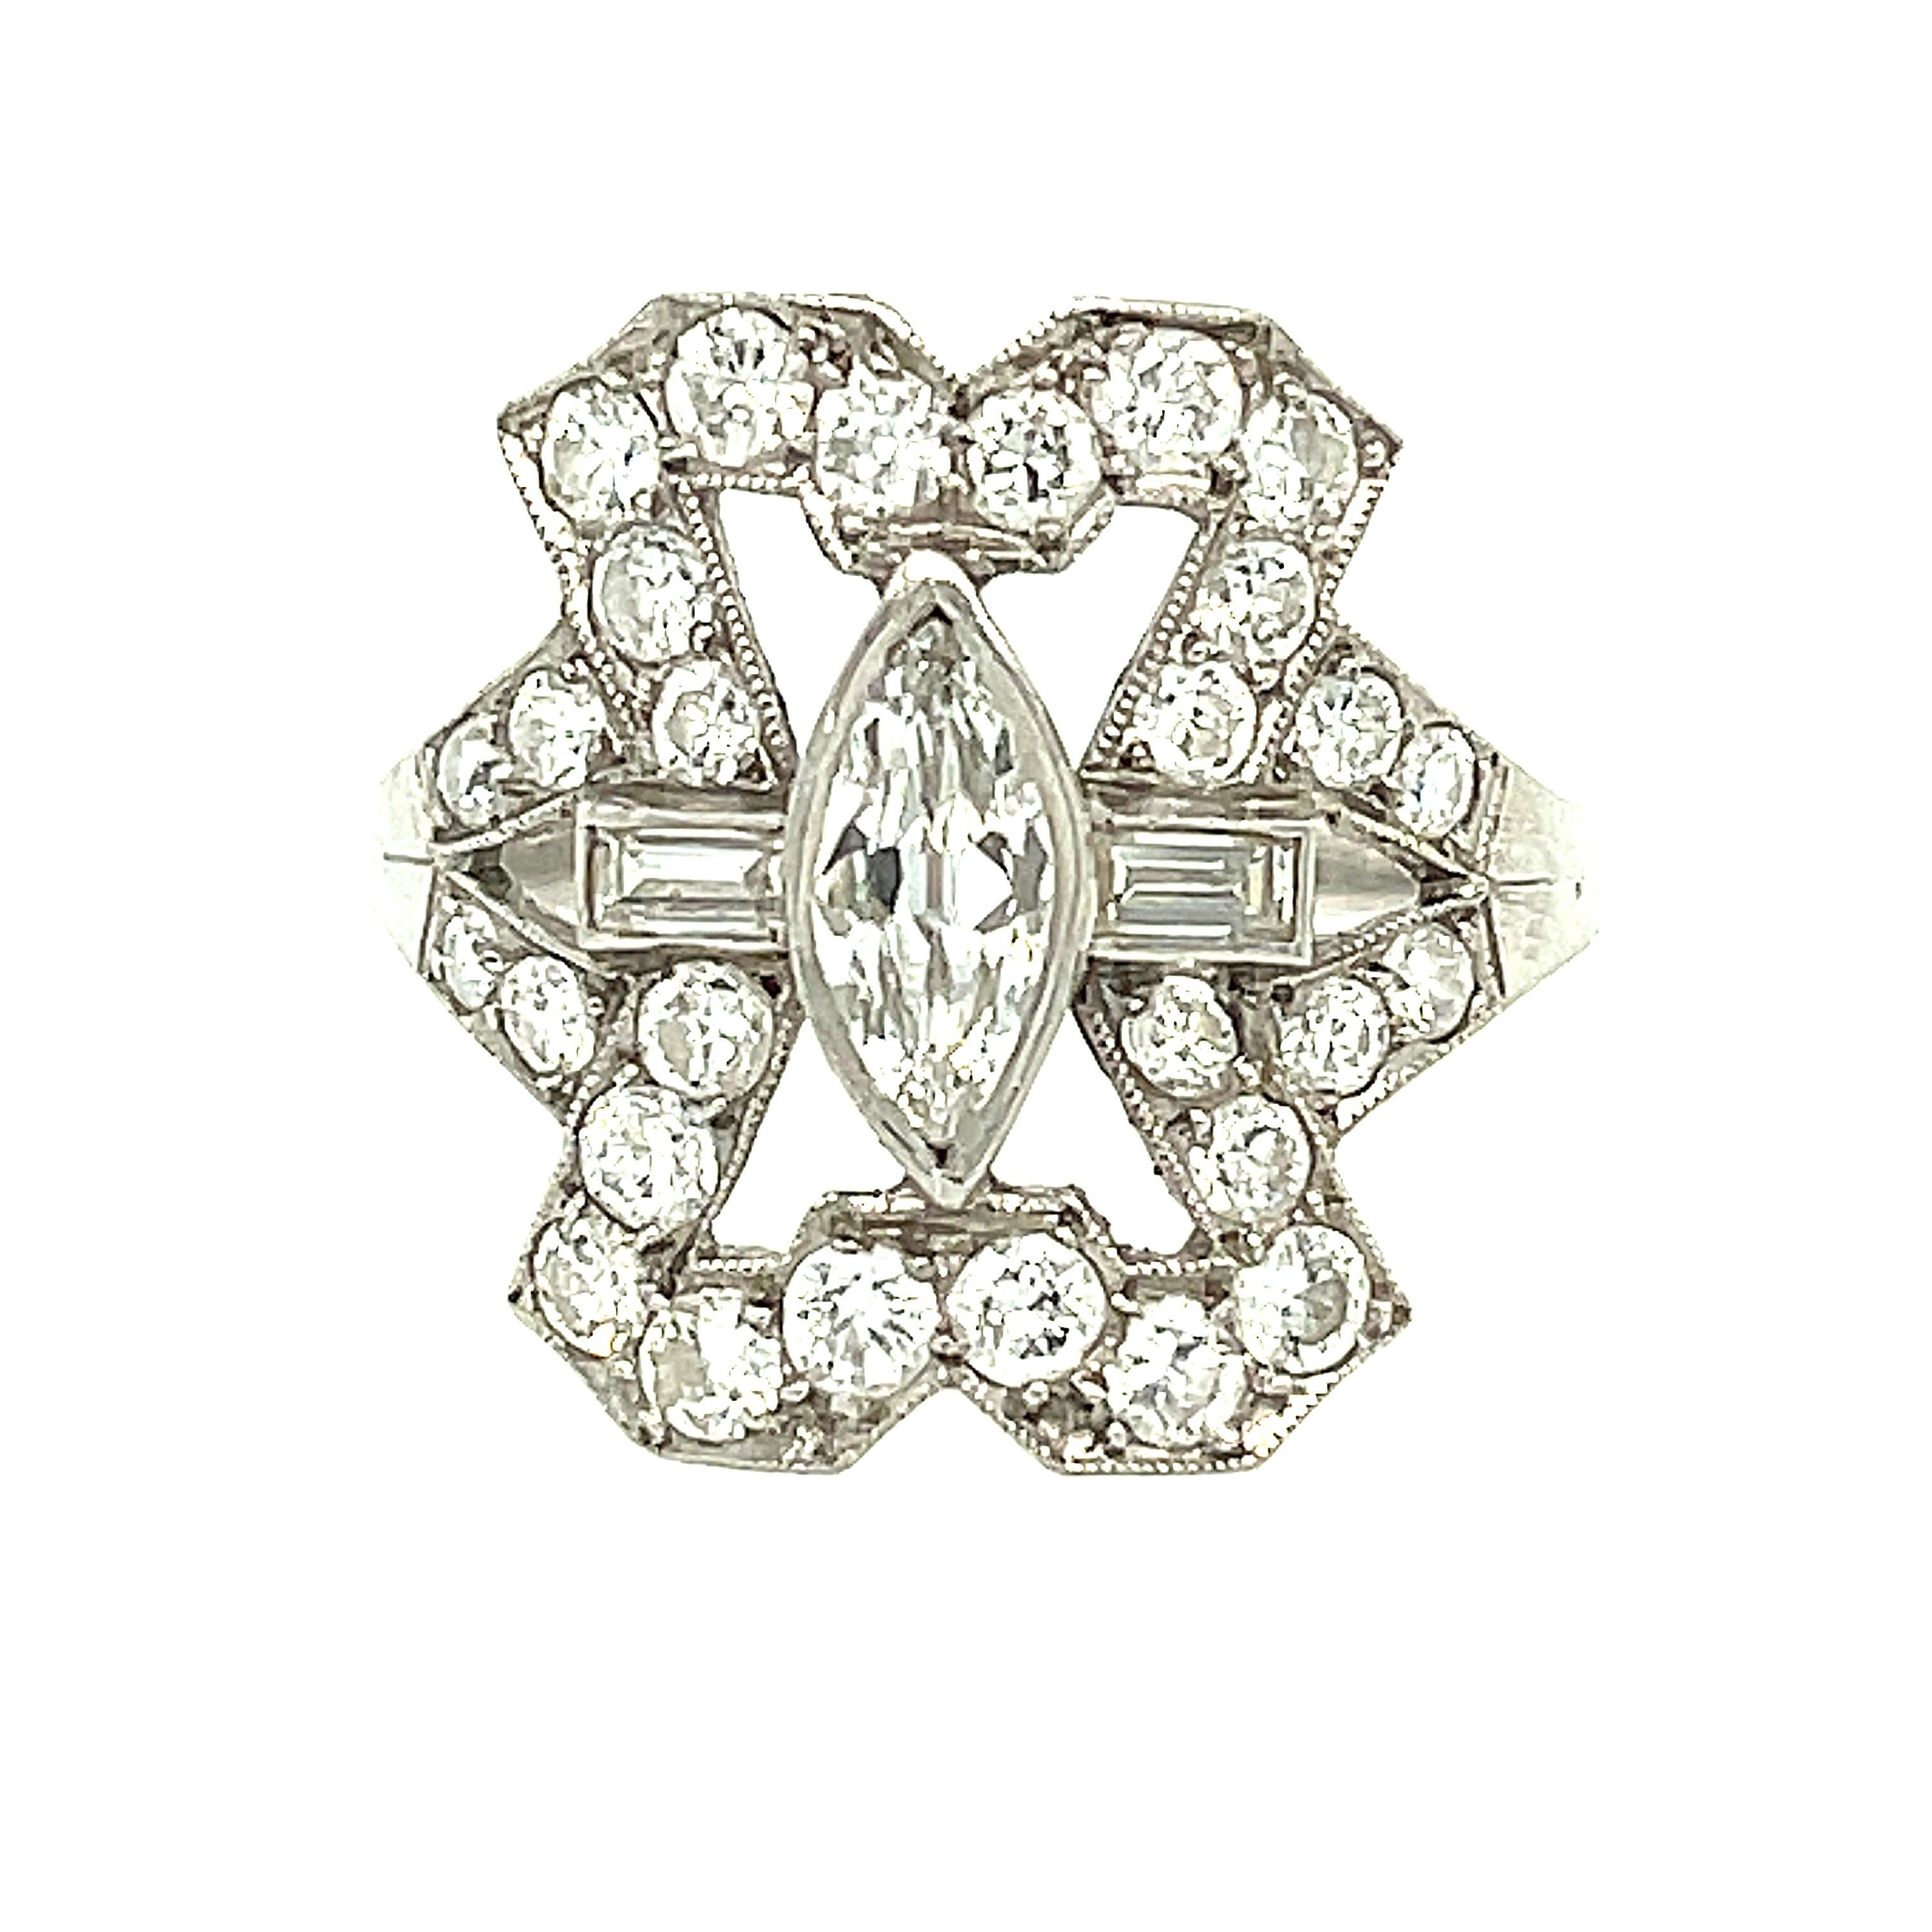 Antique Art Deco Platinum Diamond Panel Ring In Good Condition For Sale In New York, NY